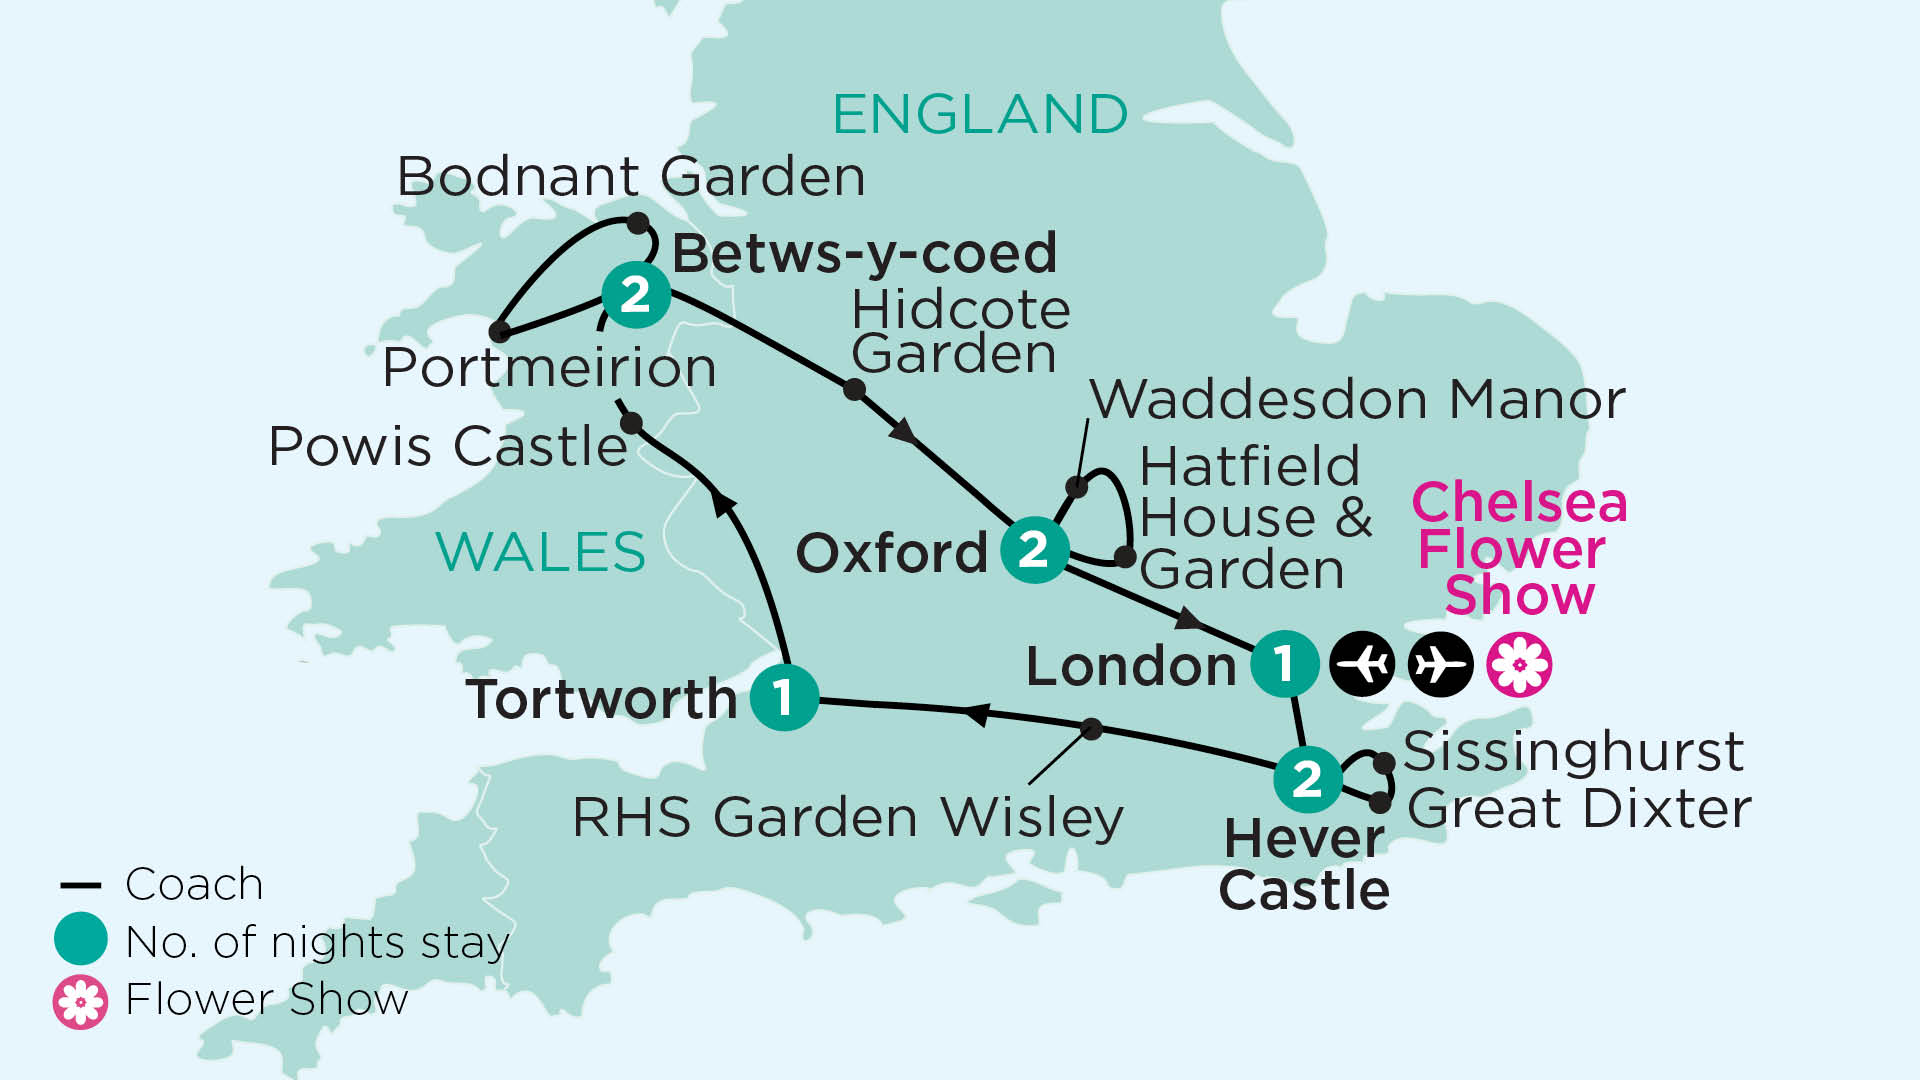 Map of England indicating all stops along the itinerary. 